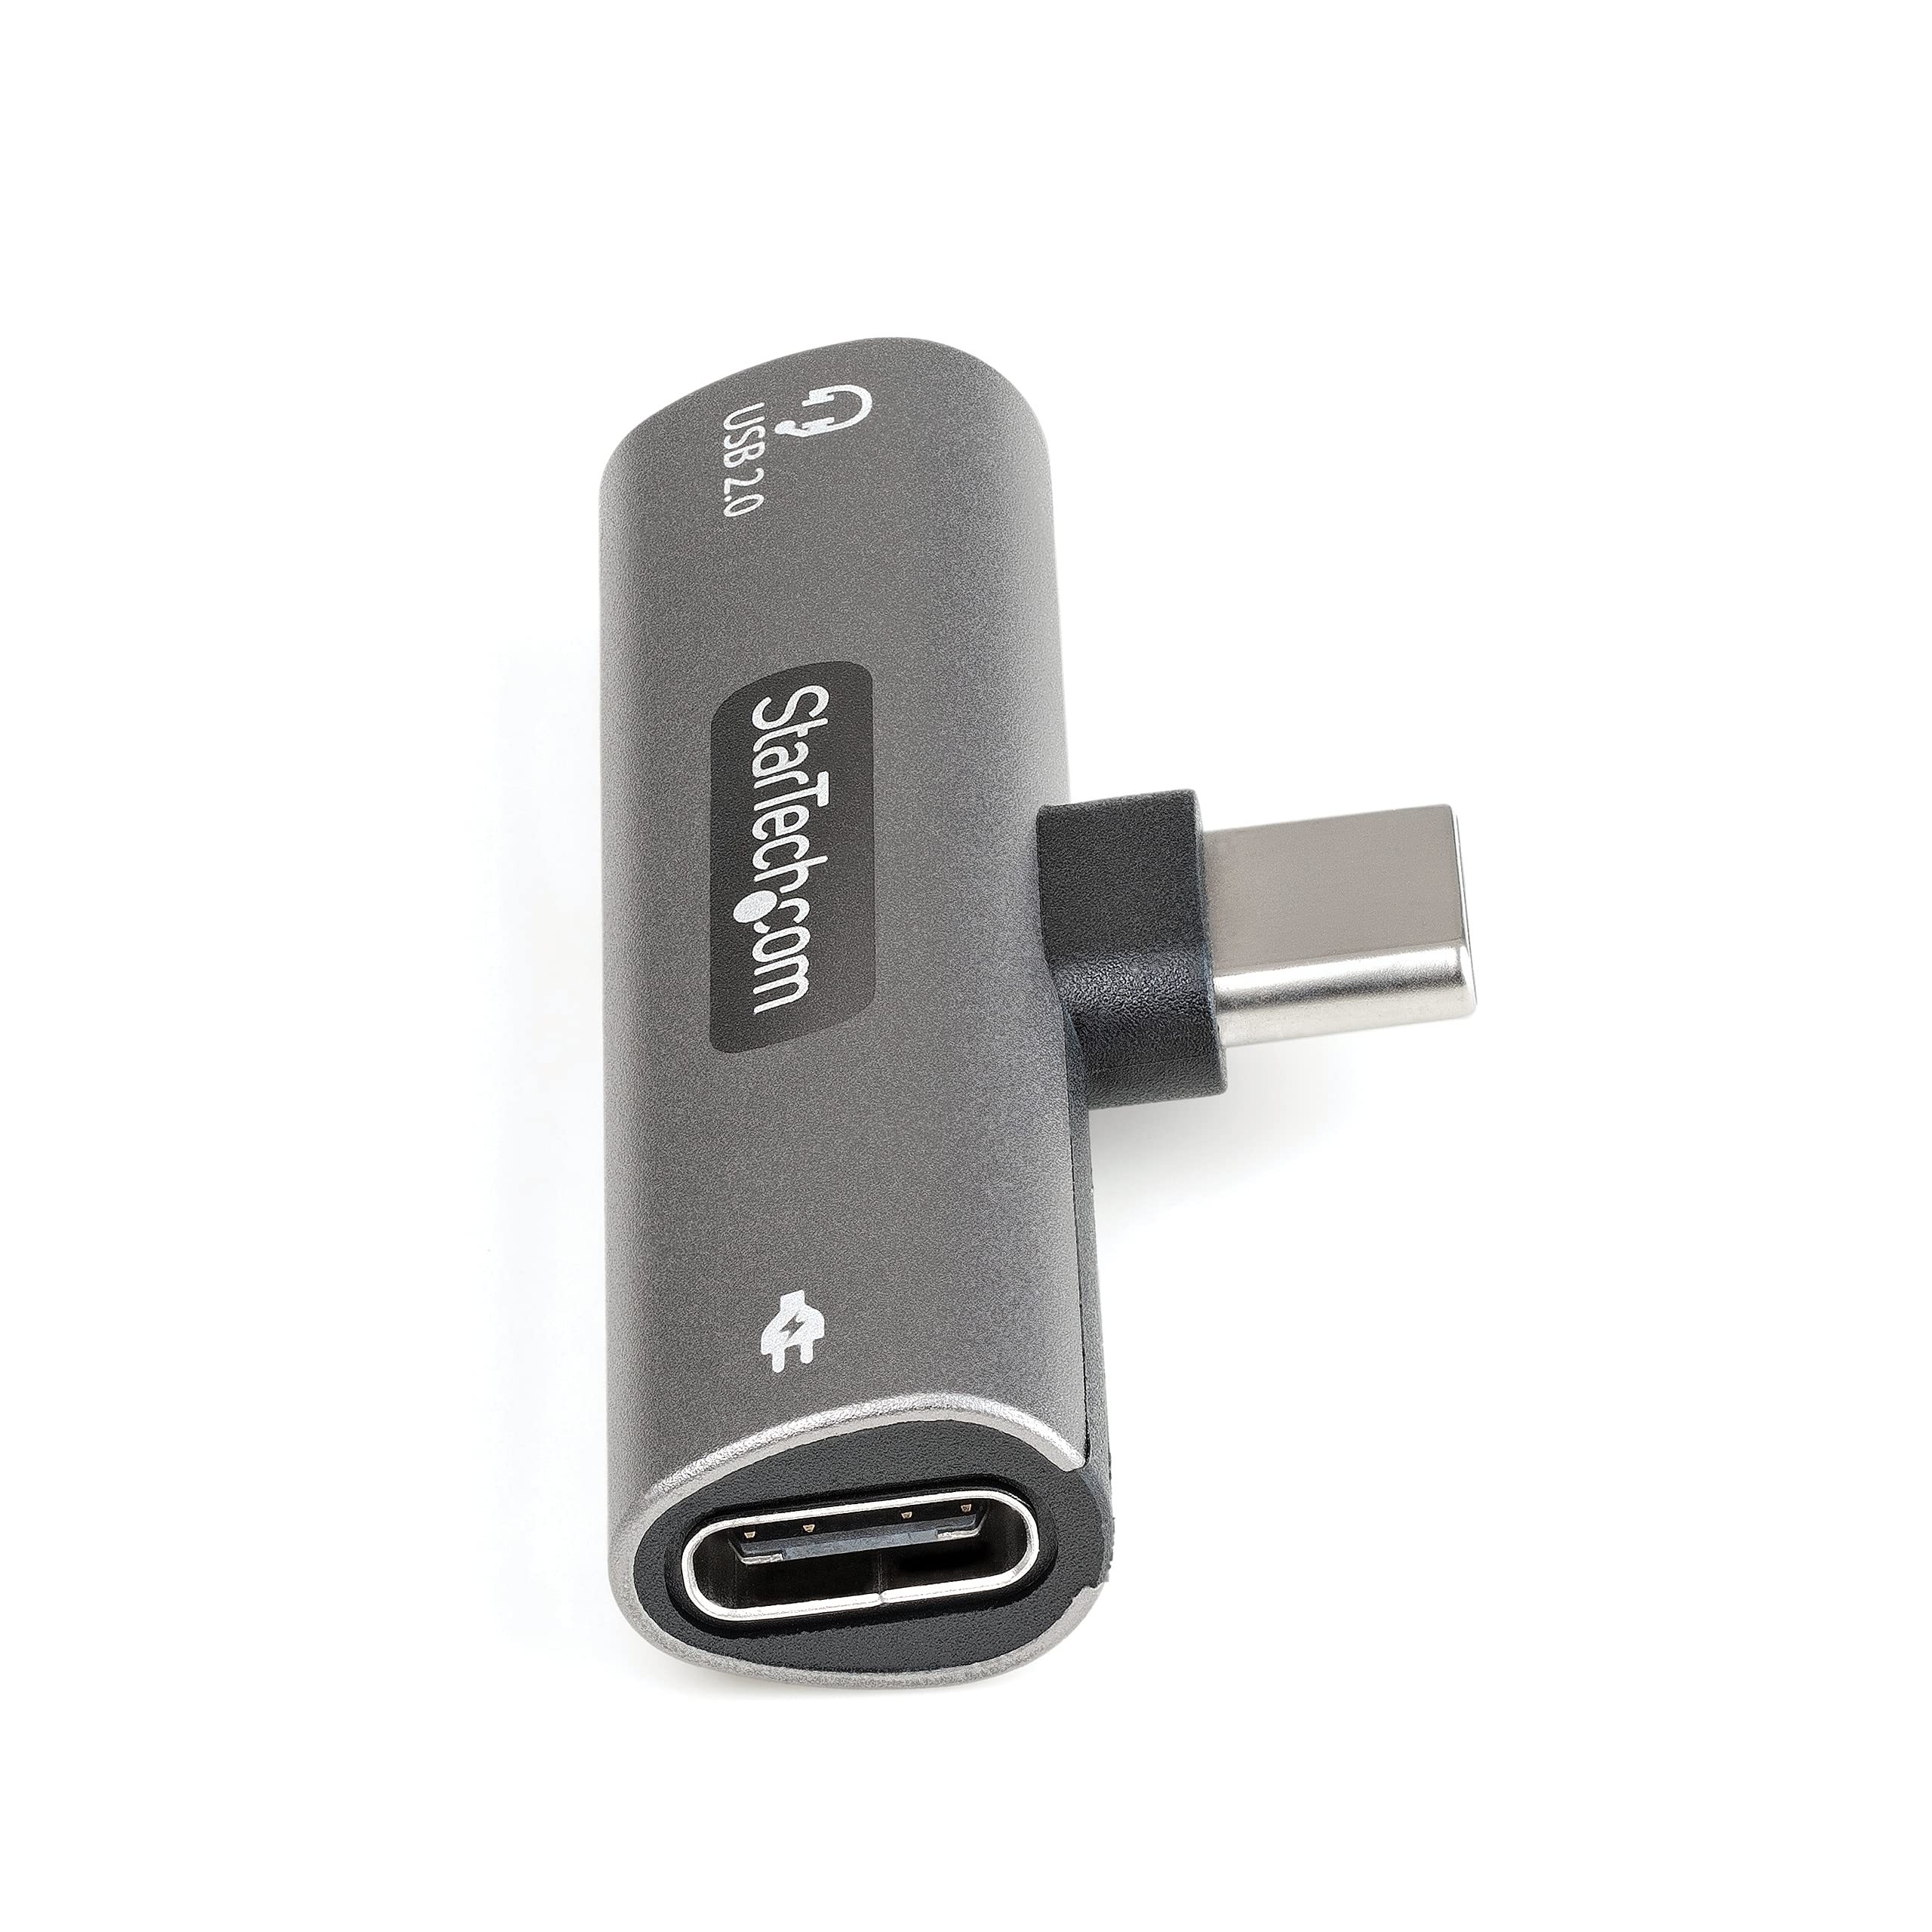 StarTech.com USB C Audio & Charge Adapter - USB-C Audio Adapter w/USB-C Audio Headphone/Headset Port and 60W USB Type-C Power Delivery Pass-Through Charger - for USB-C Phone/Tablet/Laptop (CDP2CAPDM)